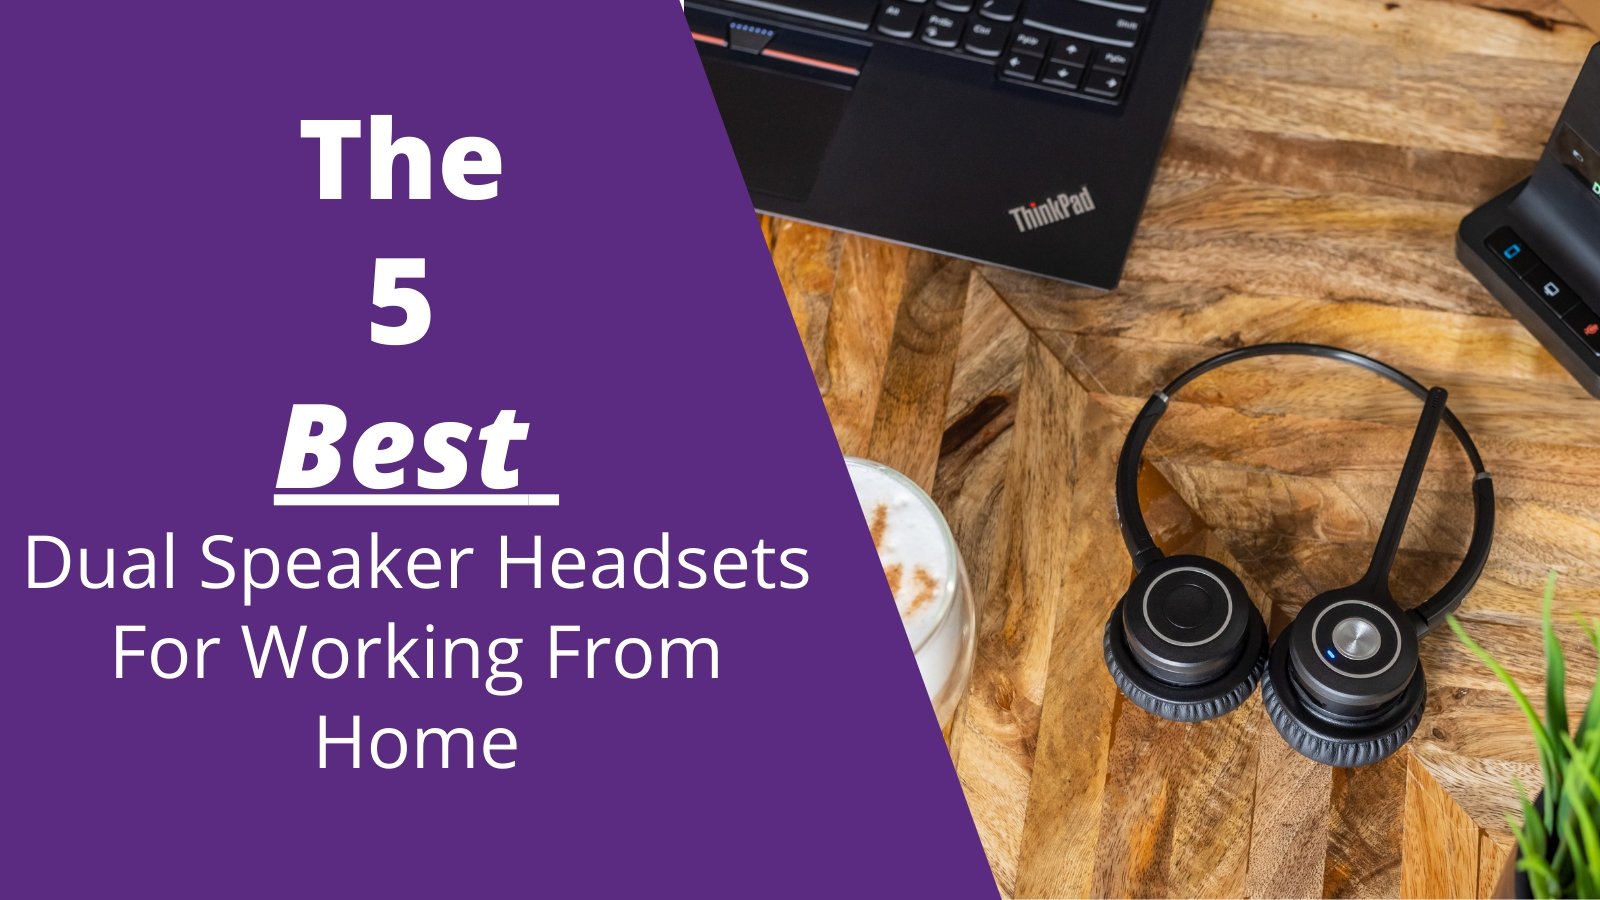 The 5 Best Dual Speaker Headsets For Working From Home - Headset Advisor